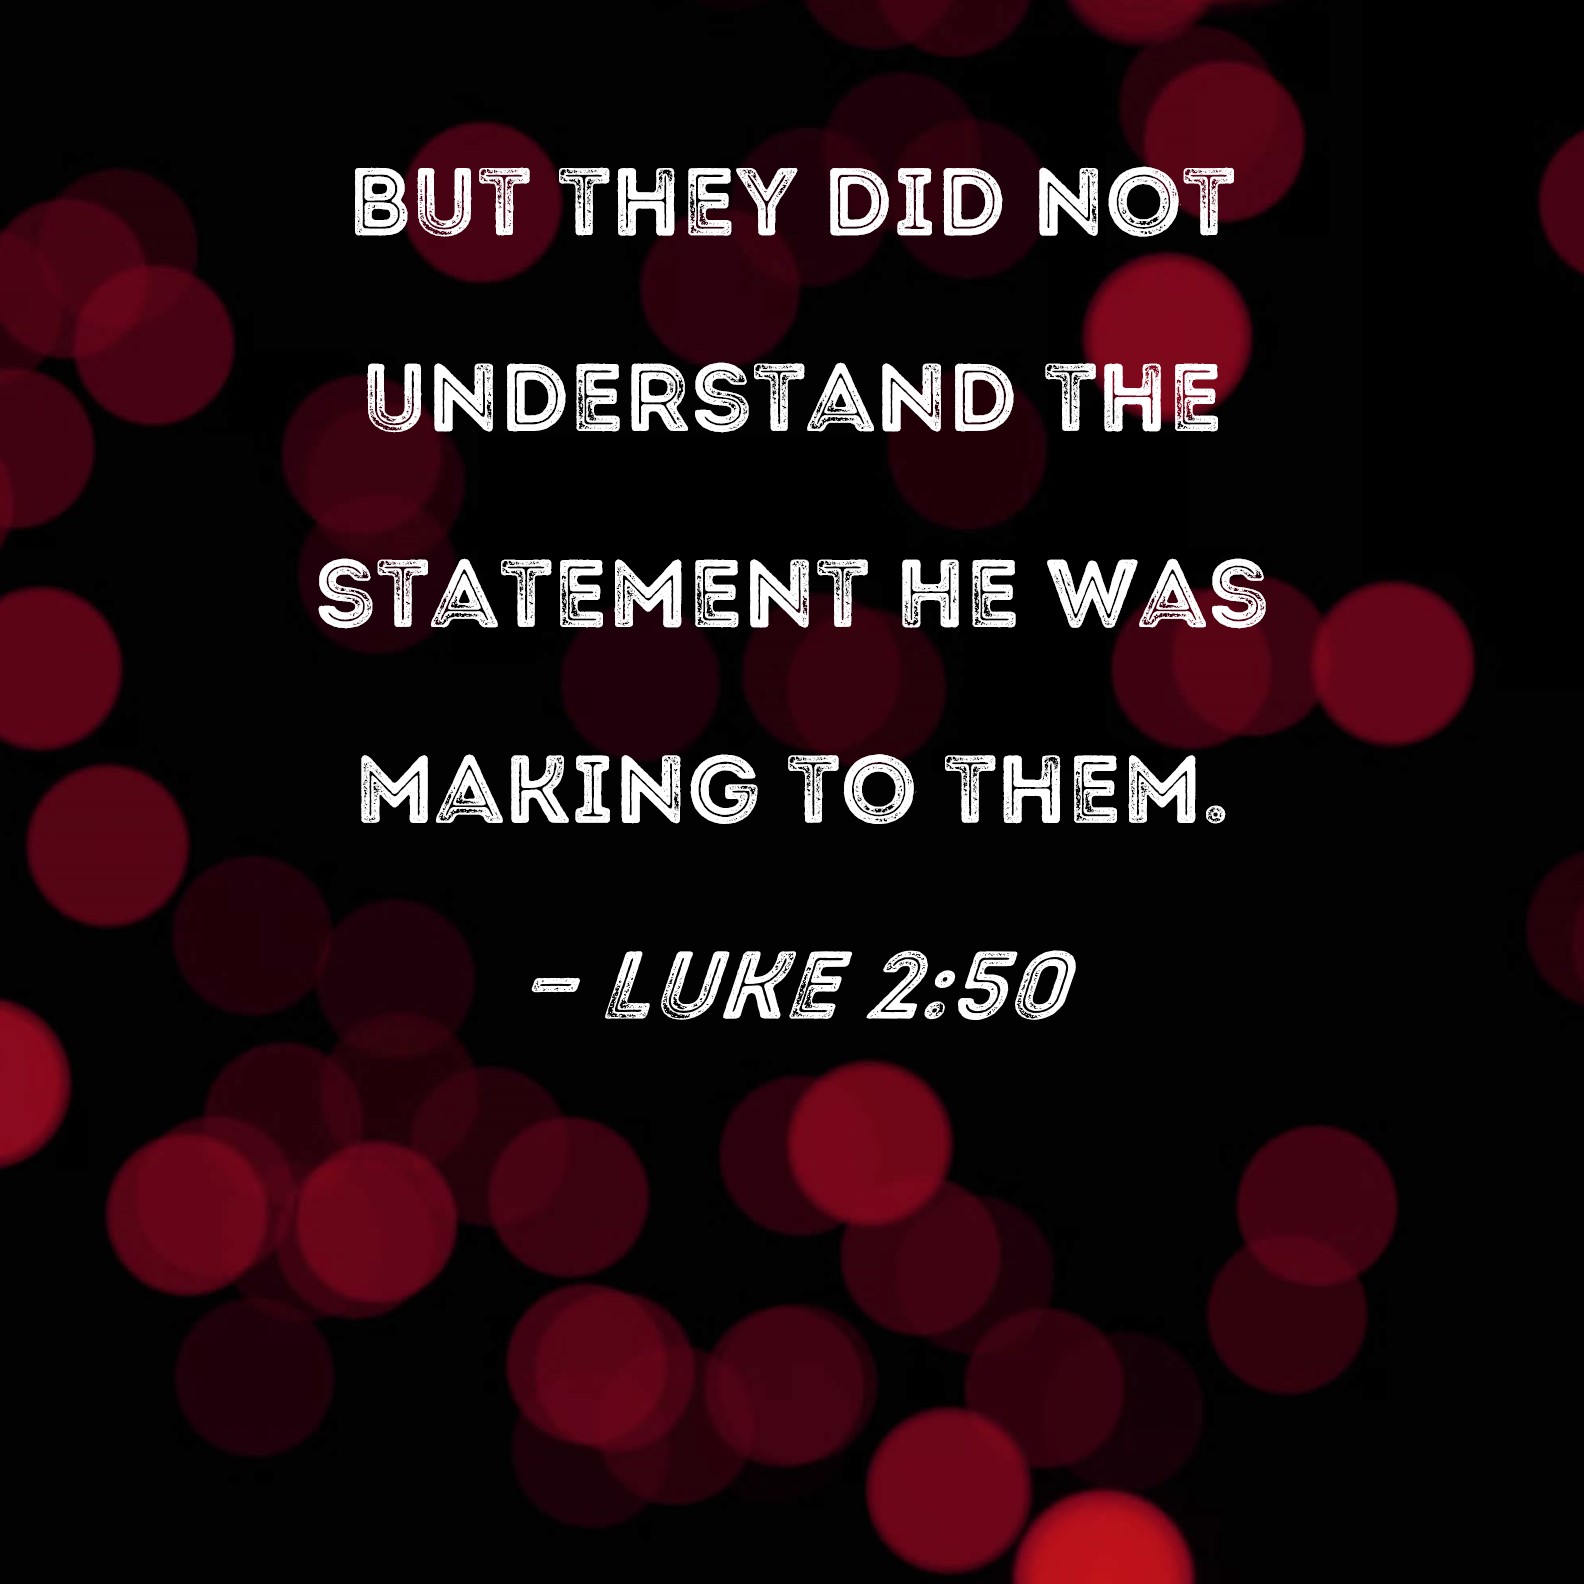 Luke 2:50 But they did not understand the statement He was making to them.